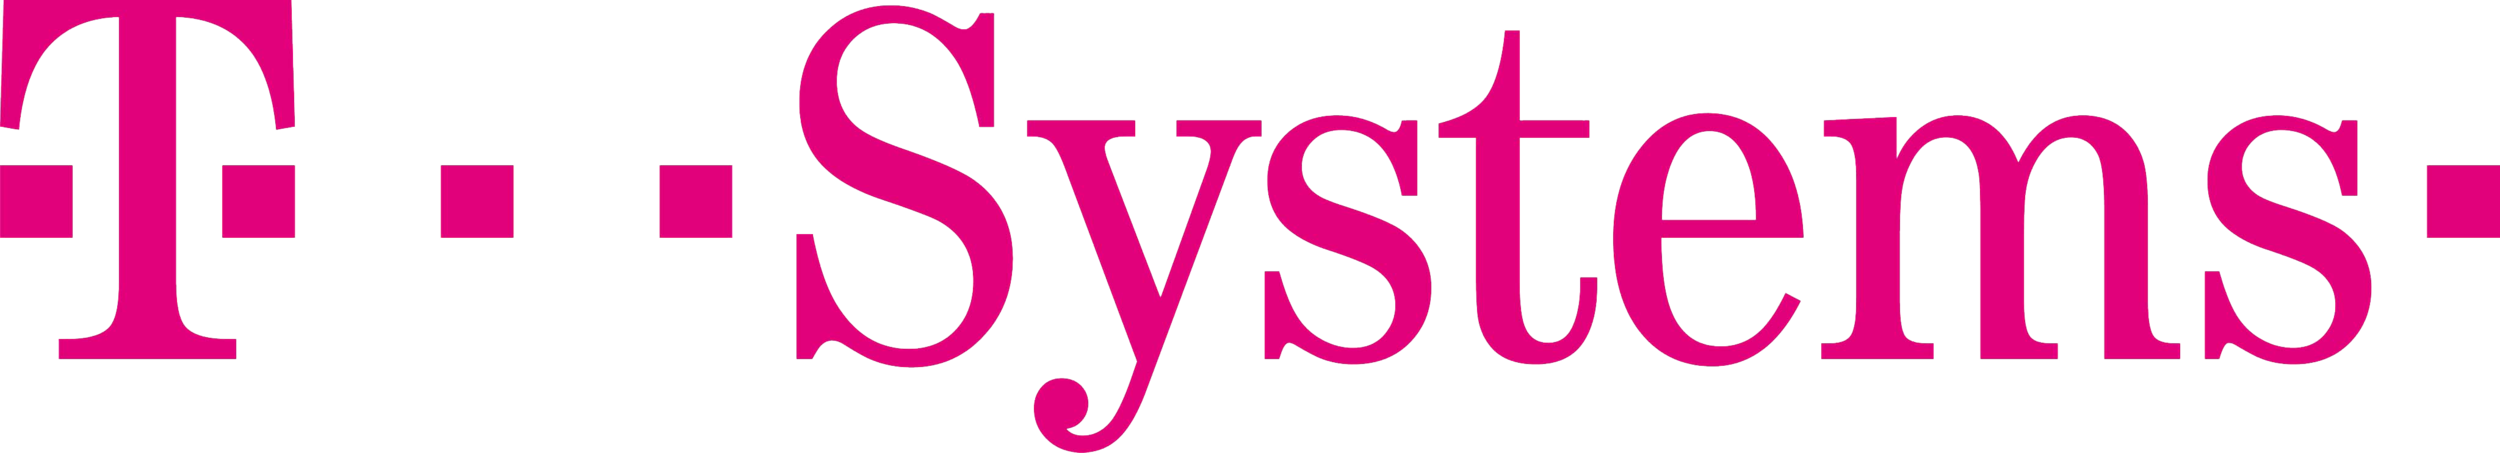 T Systems Logo.png